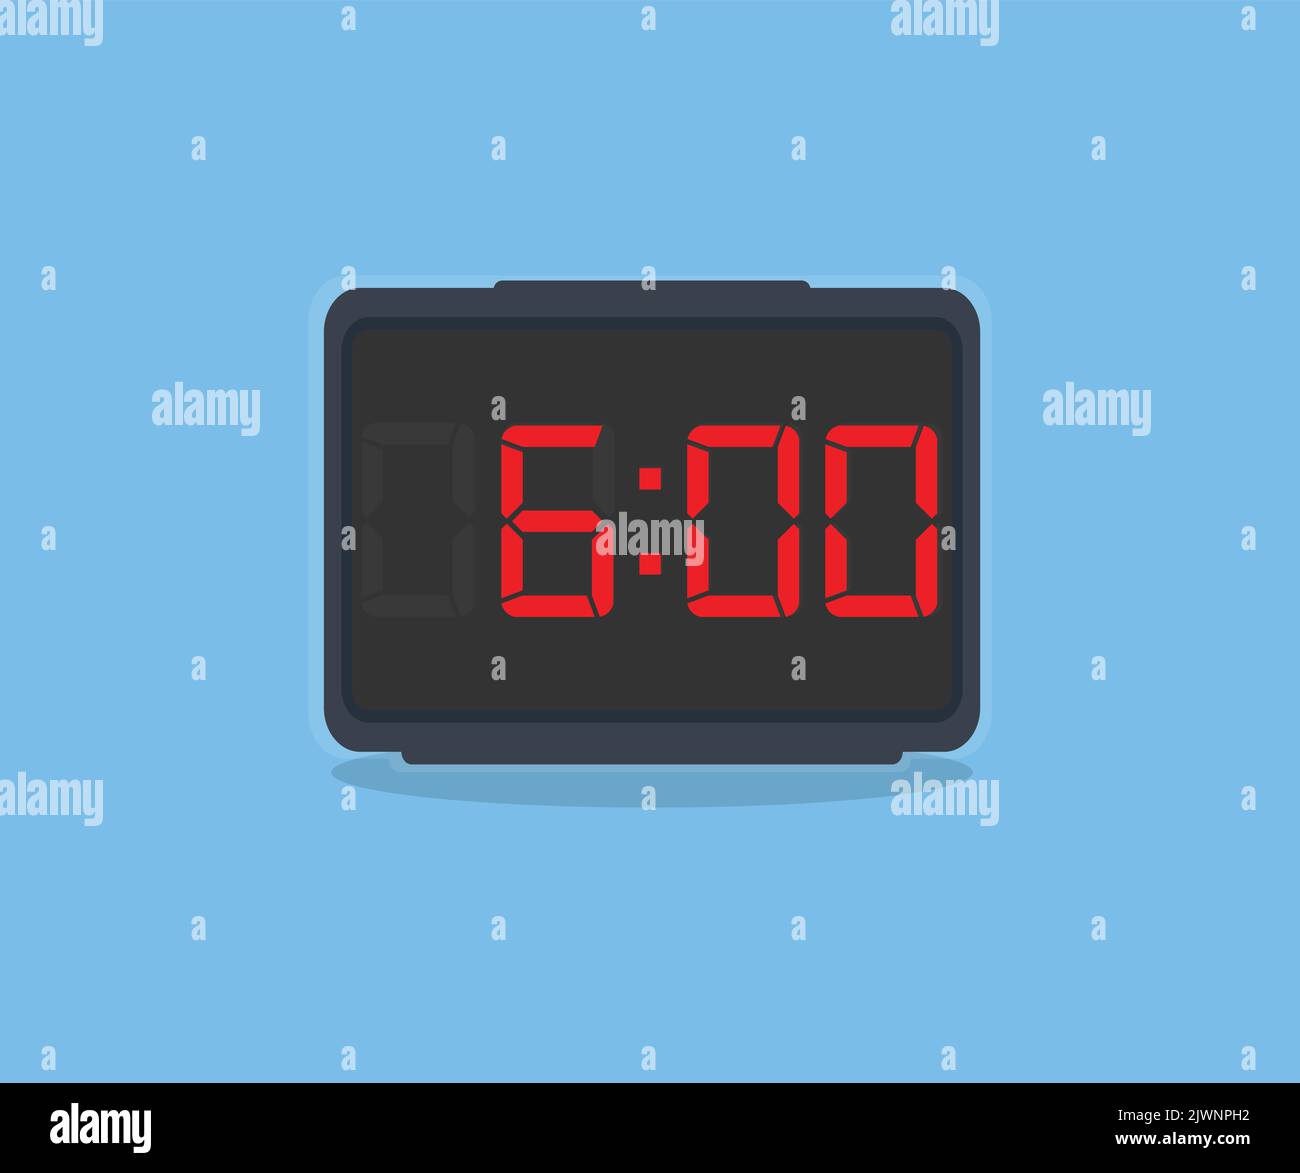 Digital black alarm clock displaying 6:00 o'clock logo design. Digital clock with red numbers - Time to wake up, attend meeting or appointment. Stock Vector